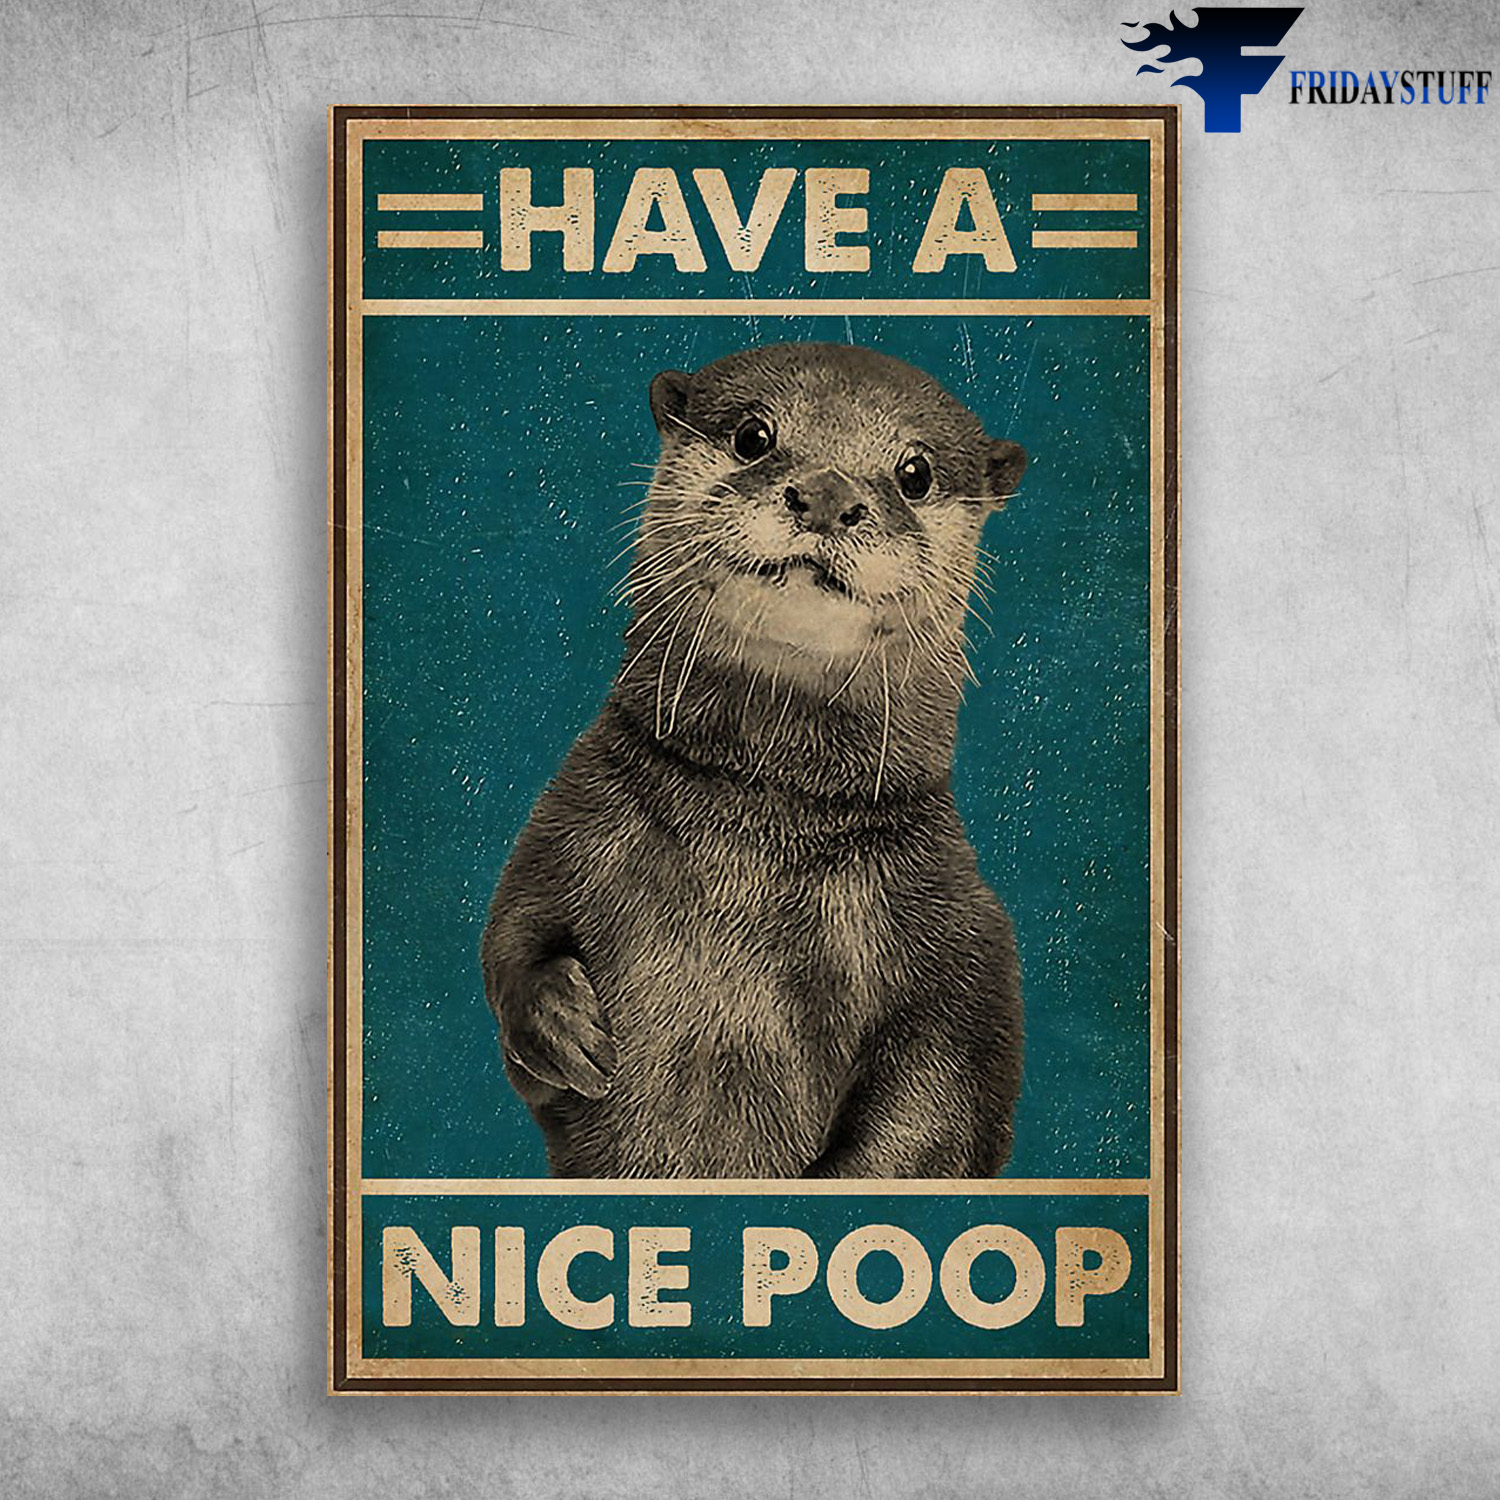 The Happy Otter - Have A Nice Poop